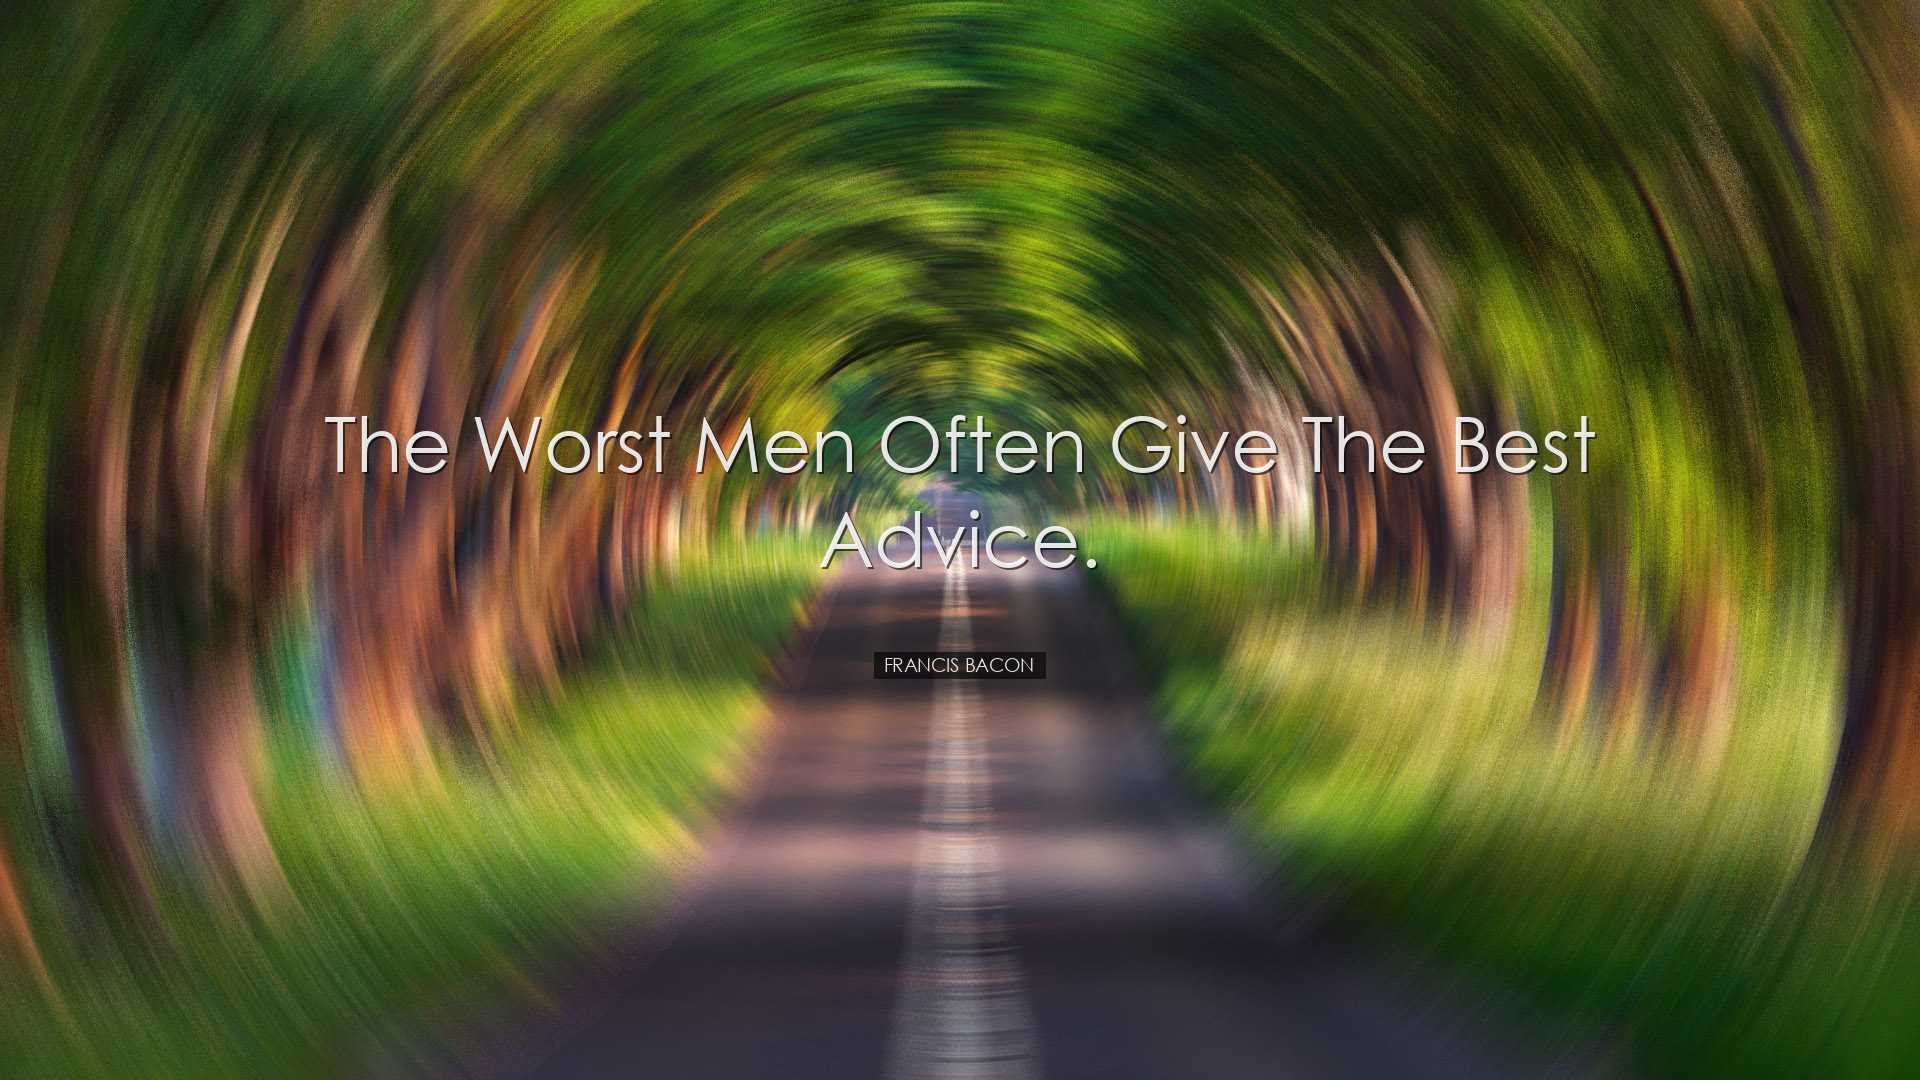 The worst men often give the best advice. - Francis Bacon